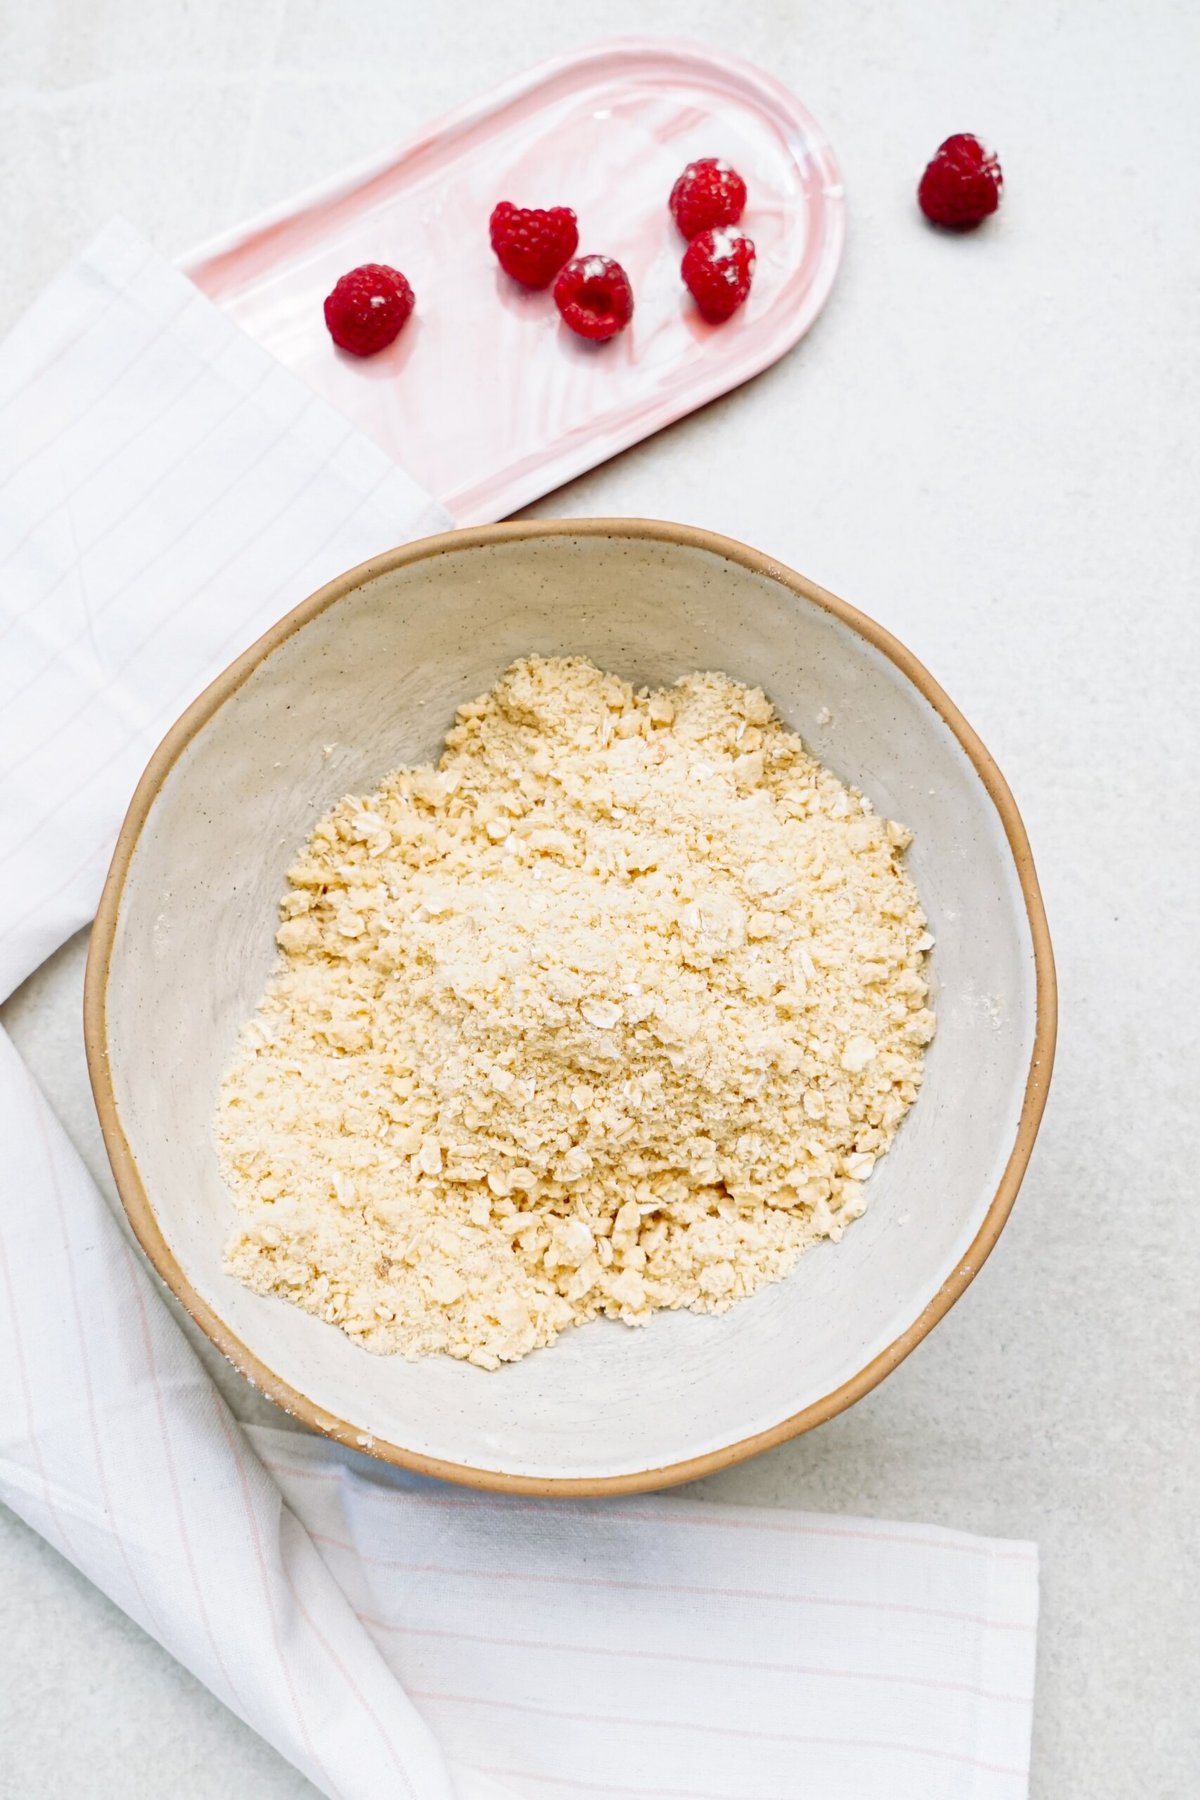 A bowl of crumbled flour with a cloth beside it and a tray of raspberries on the surface.